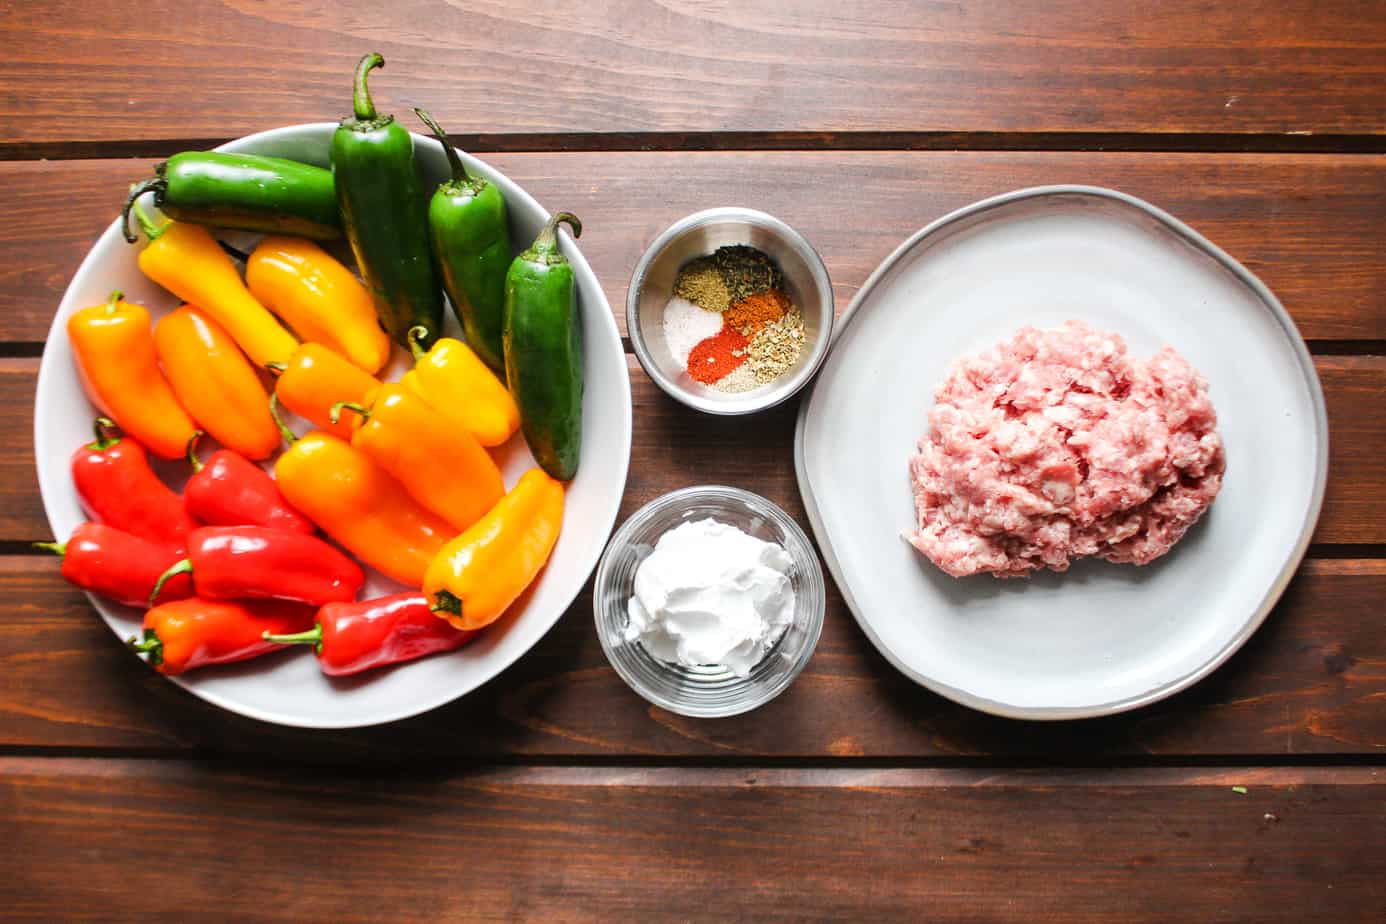 ingredients: a rainbow of mini peppers in red, orange, yellow, green, spices in a bowl, dairy free cream cheese, raw ground pork